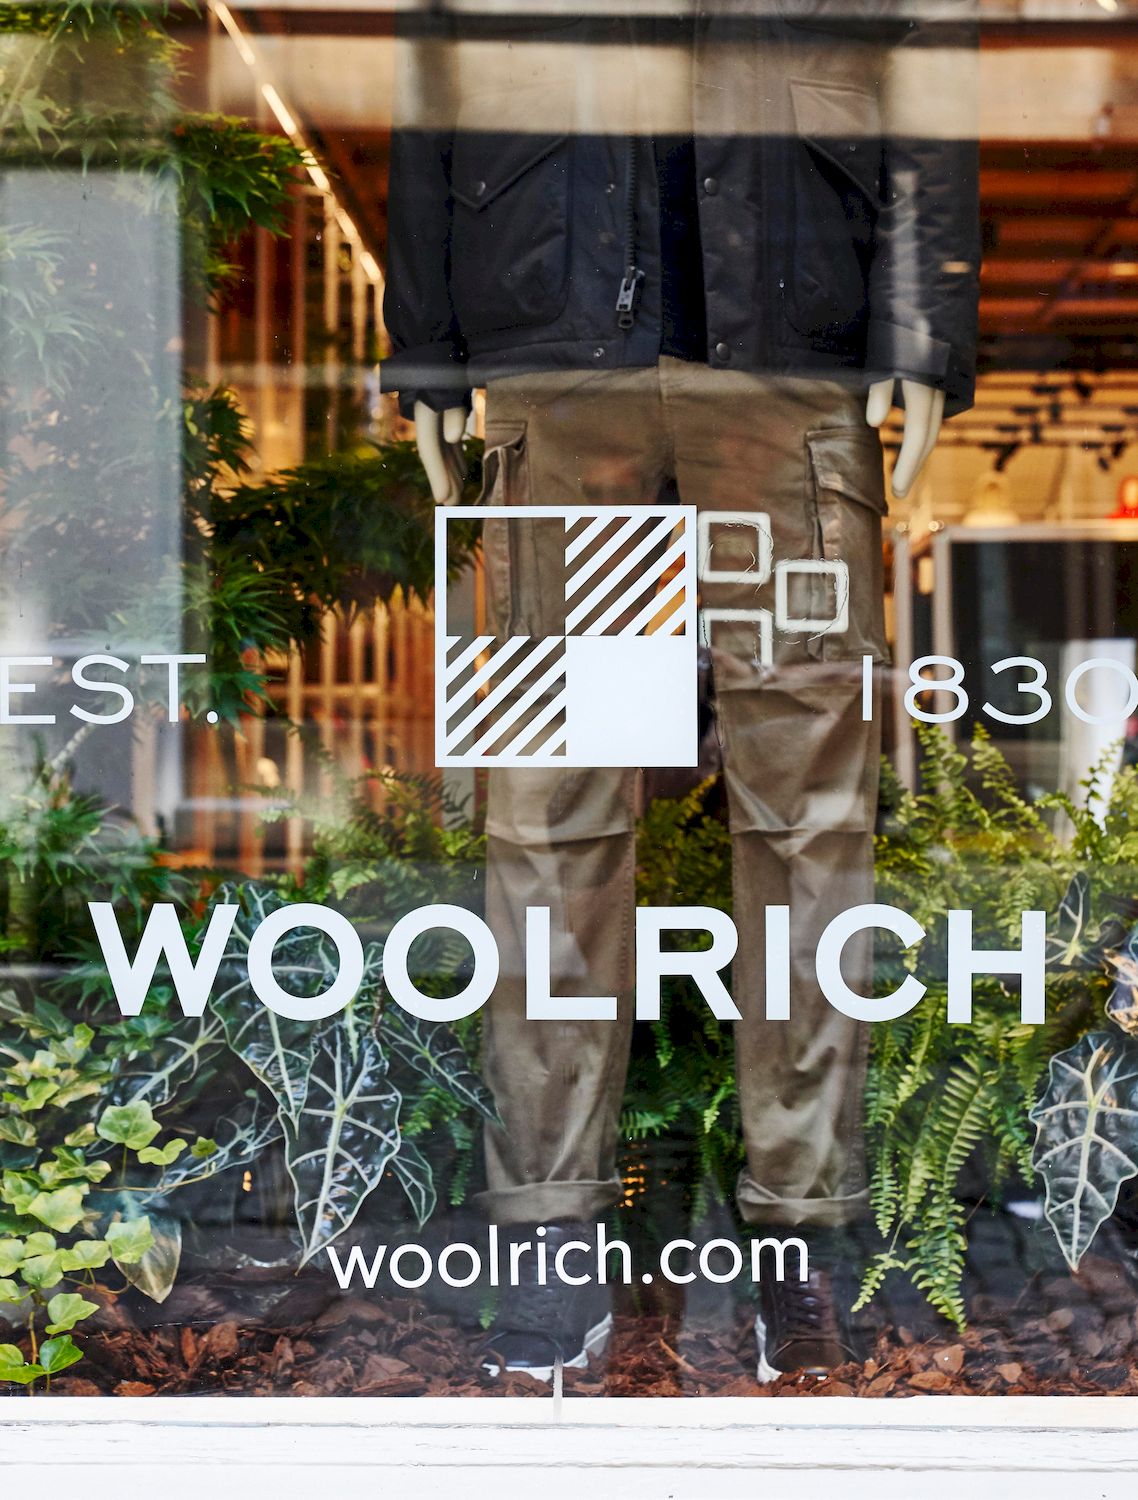 0x0-Woolrich_NYC_Soho_FlagshipStore (4)